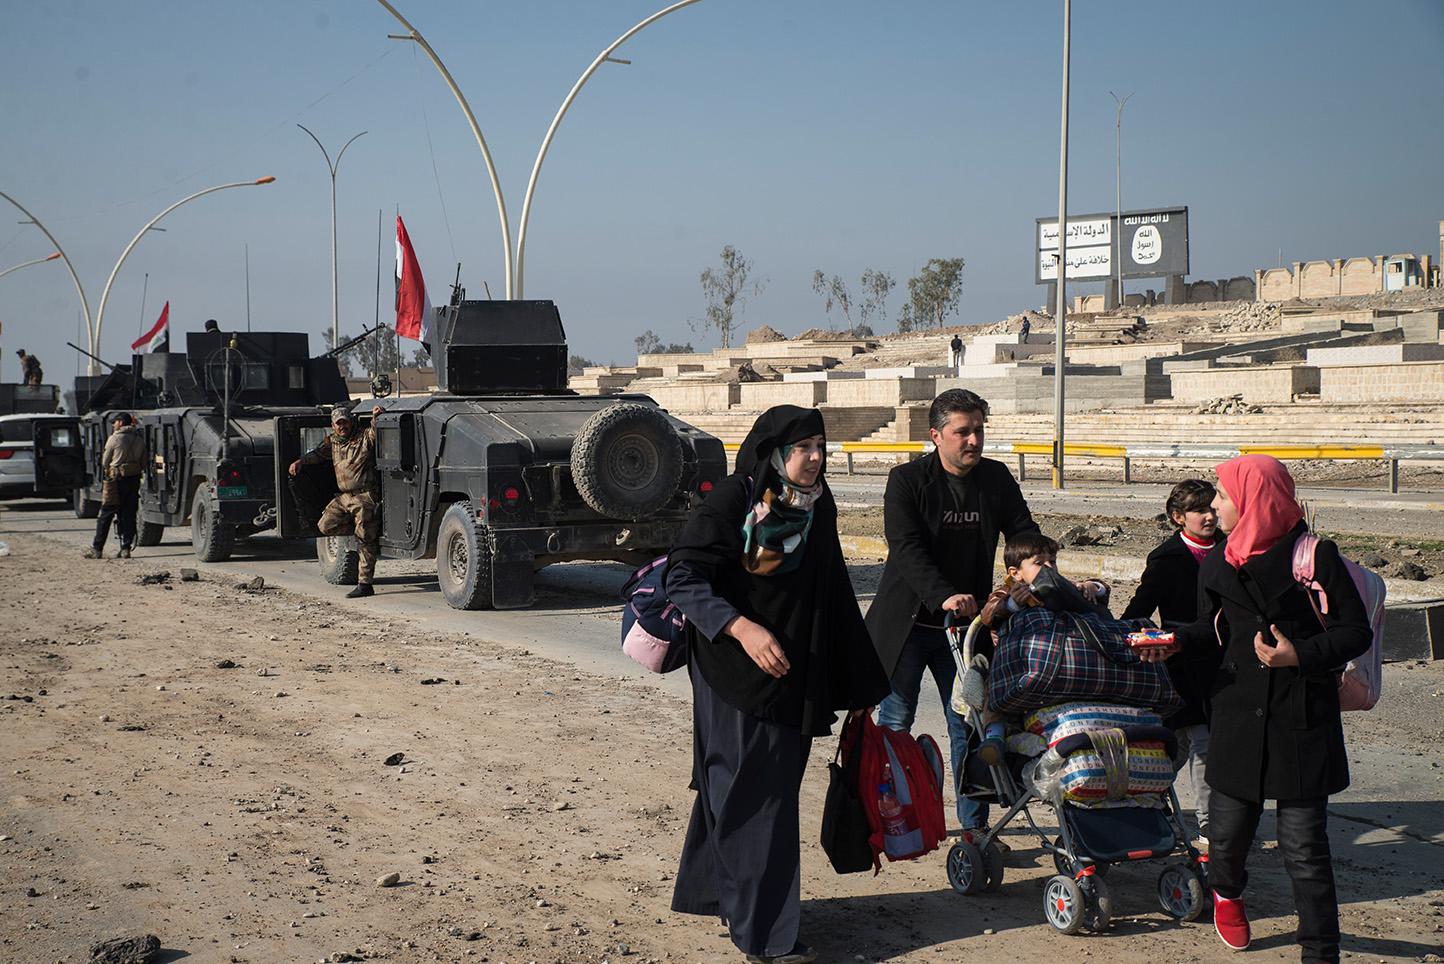 The Impact of ISIS in Iraq - Mosul, Iraq. After two and half years under Islamic State...